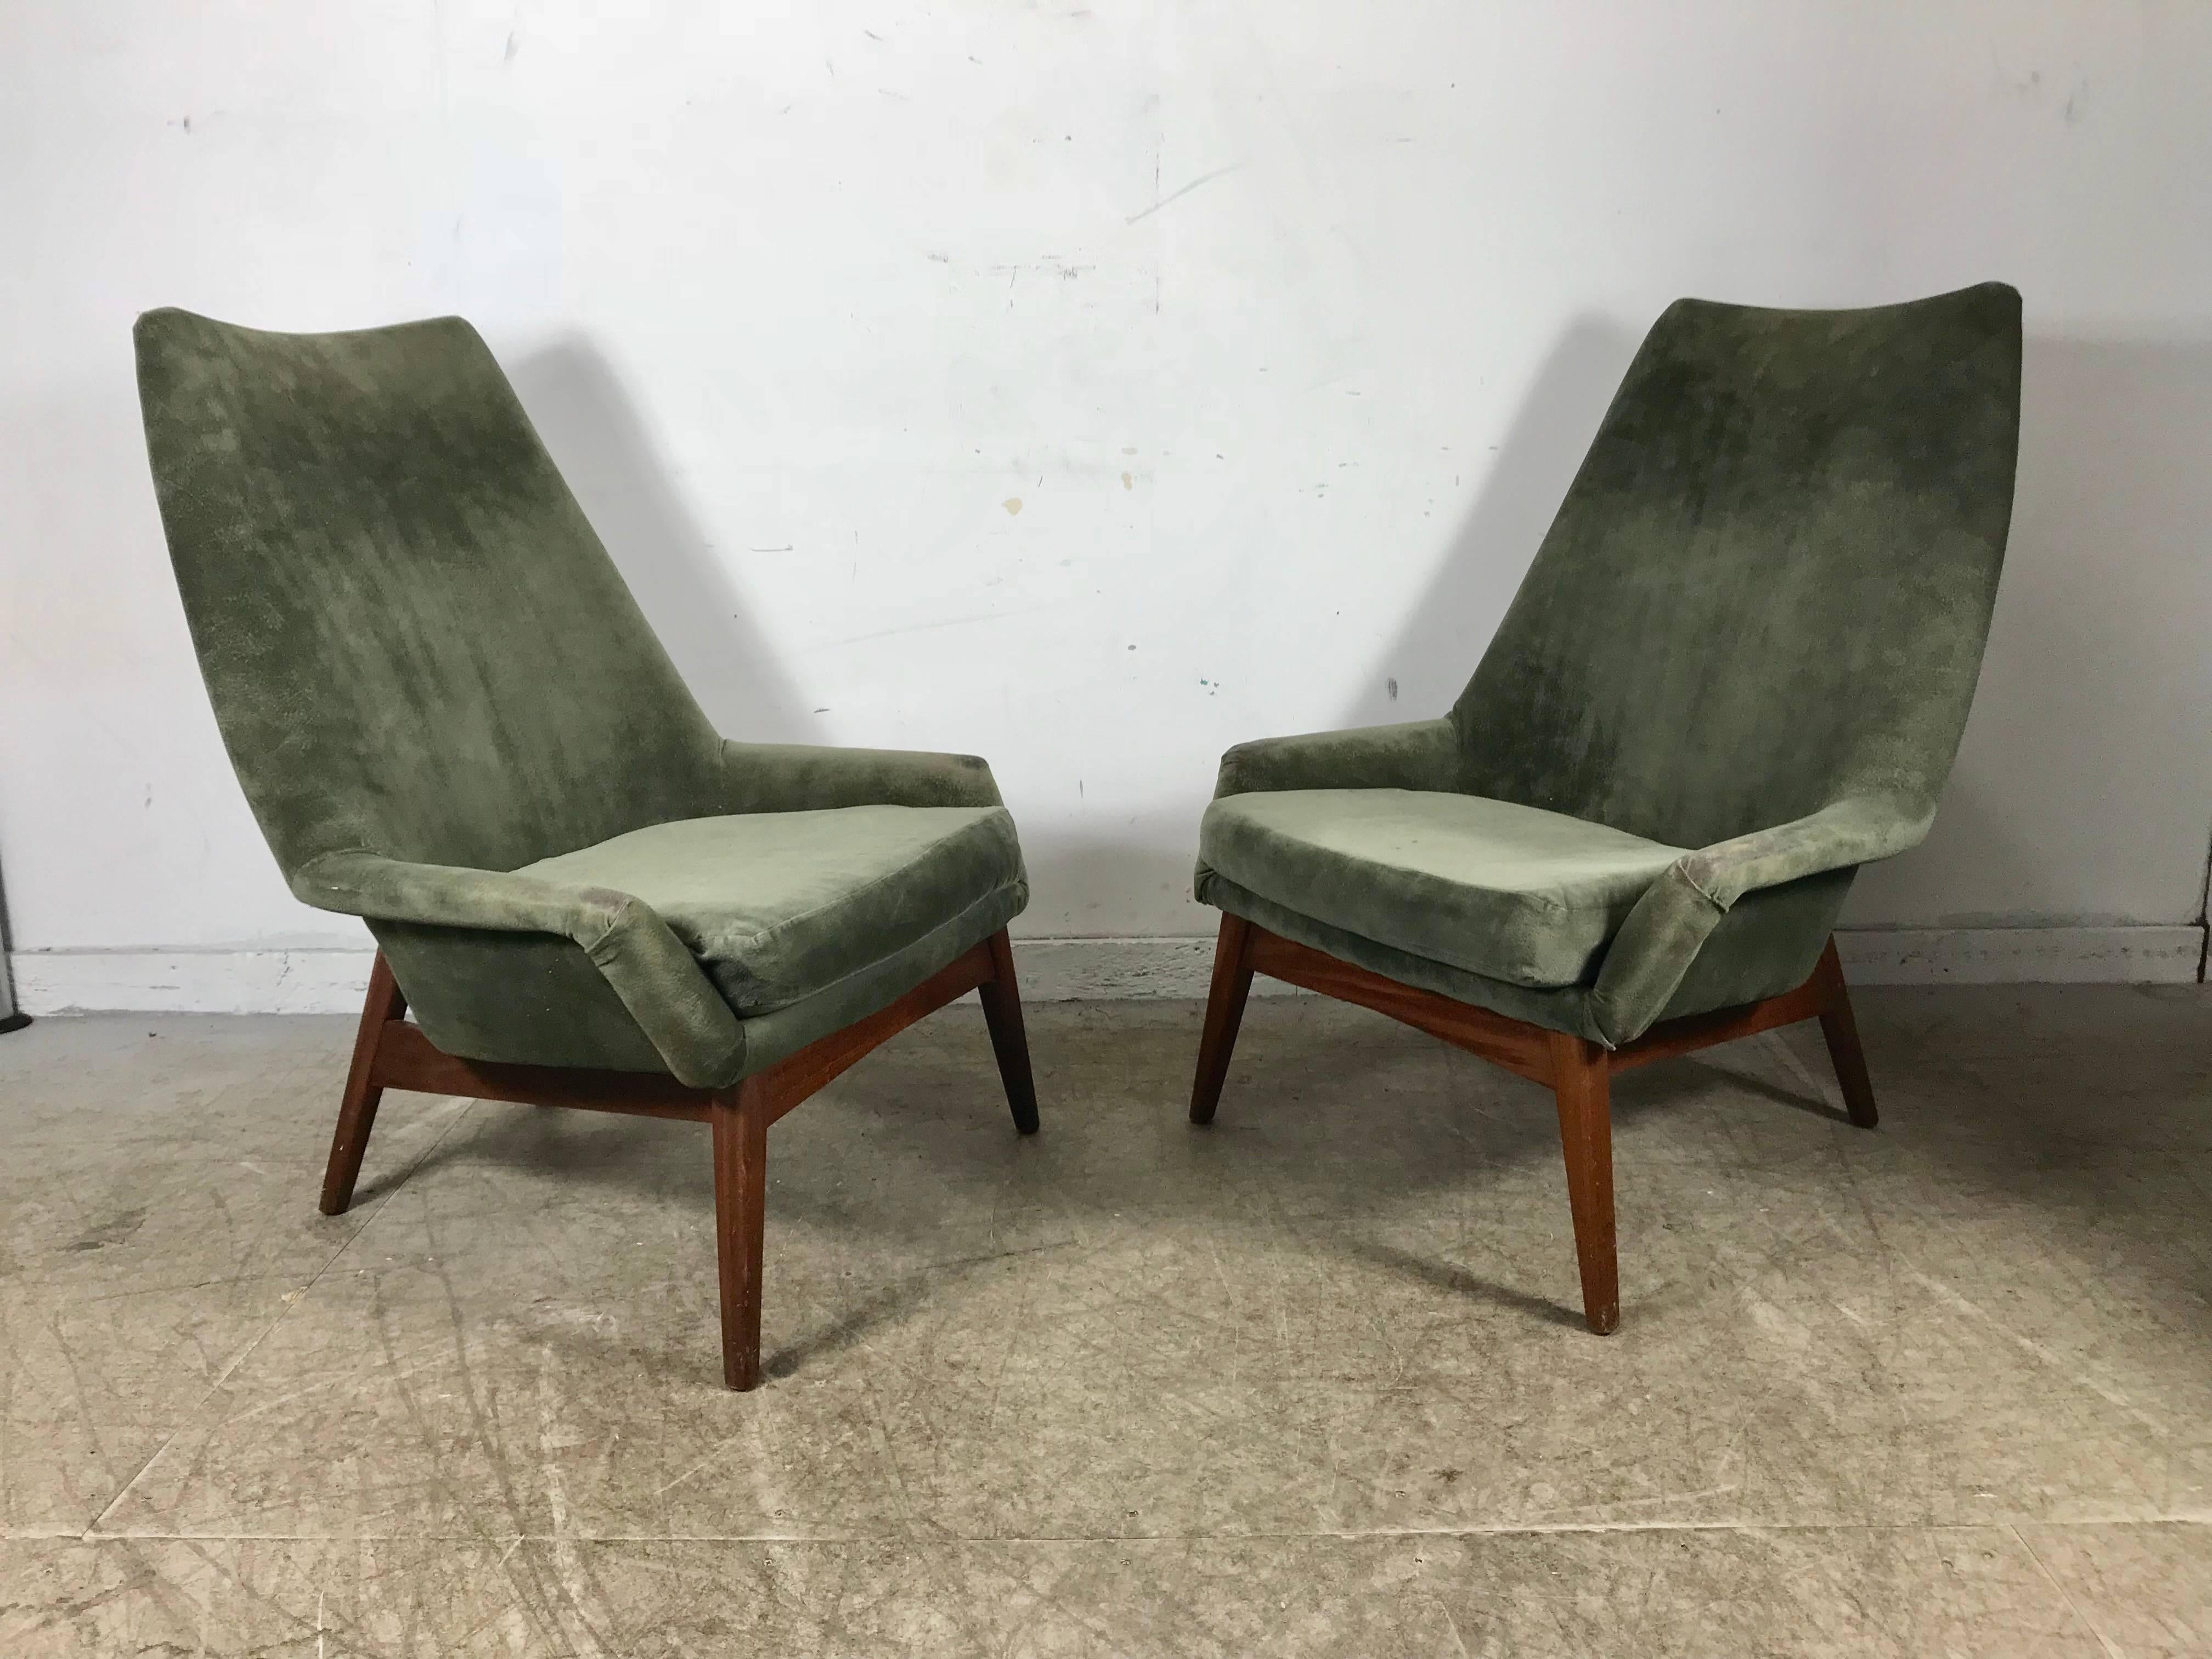 Pair of Mid-Century Modern lounge chairs by Jan Kuypers. Upholstered some time ago in a celadon green color suede. Super stylish and extremely comfortable, stunning teak wood base reminiscent of Classic designs by Adrian Pearsall, hand delivery